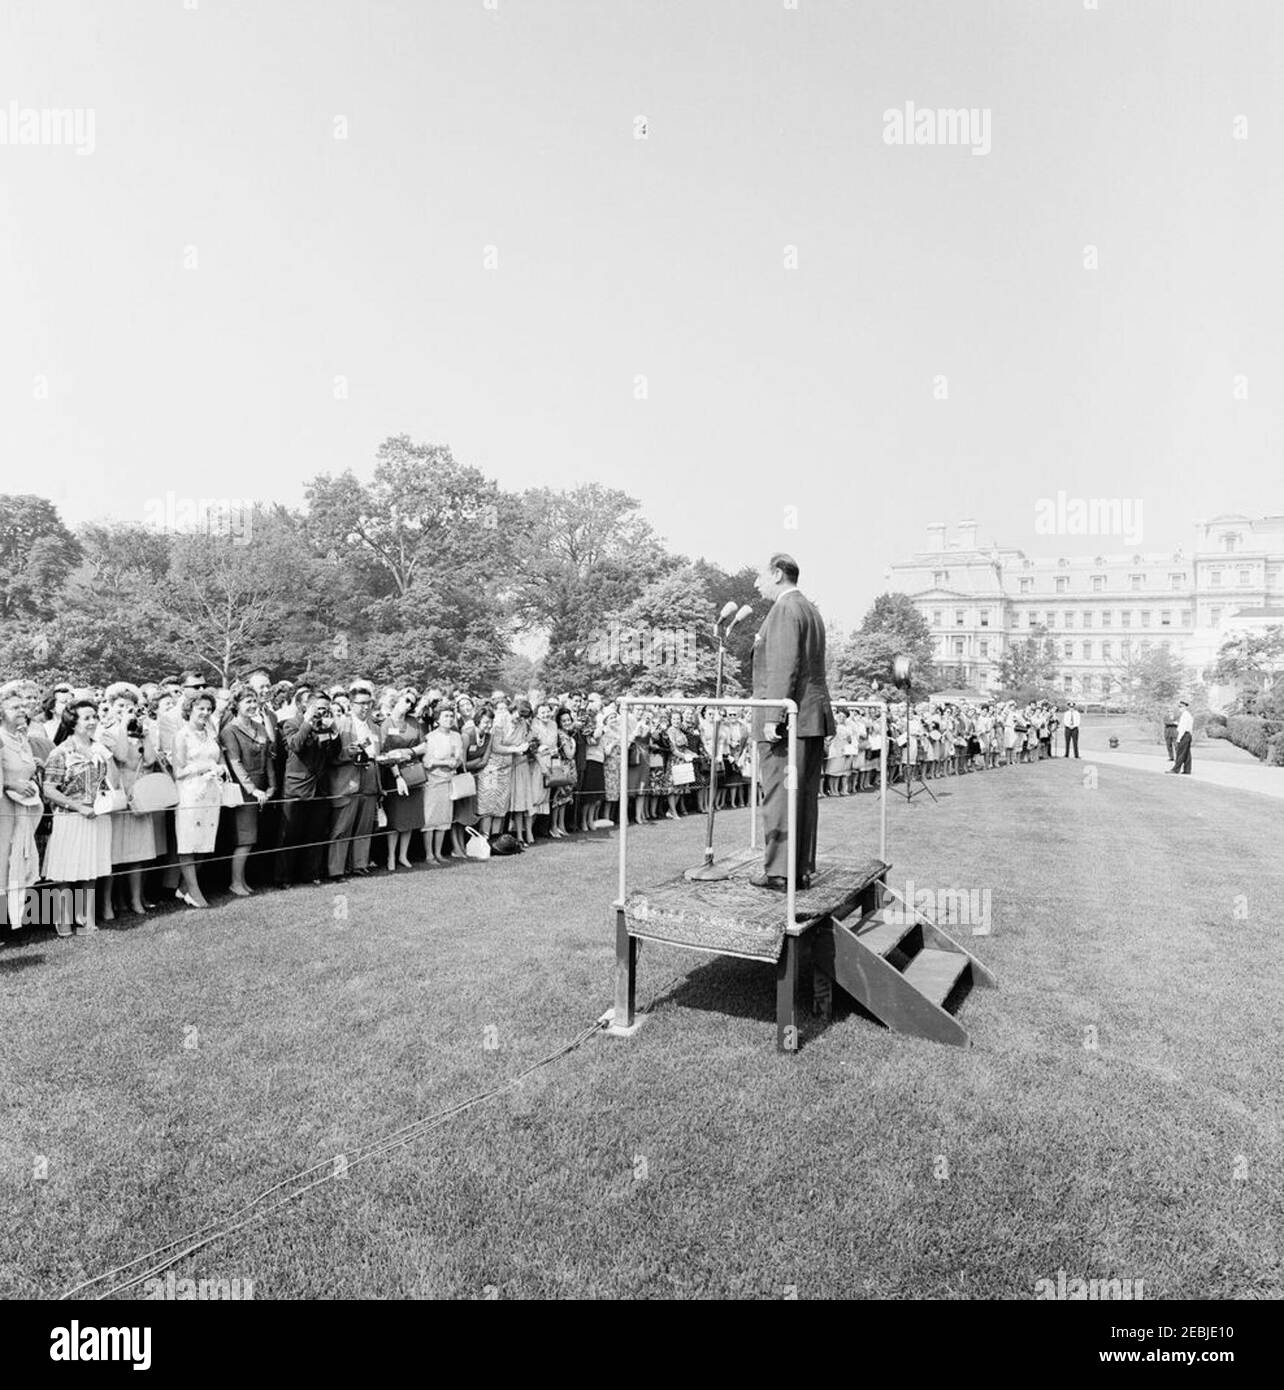 Visit of delegates to the Second International Congress on Medical Librarianship, 9:45AM. U.S. Representative to the United Nations (UN), Adlai Stevenson (on speakersu0027 platform), delivers remarks to delegates of the Second International Congress on Medical Librarianship. The Executive Office Building is visible in the background. South Lawn, White House, Washington, D.C. Stock Photo